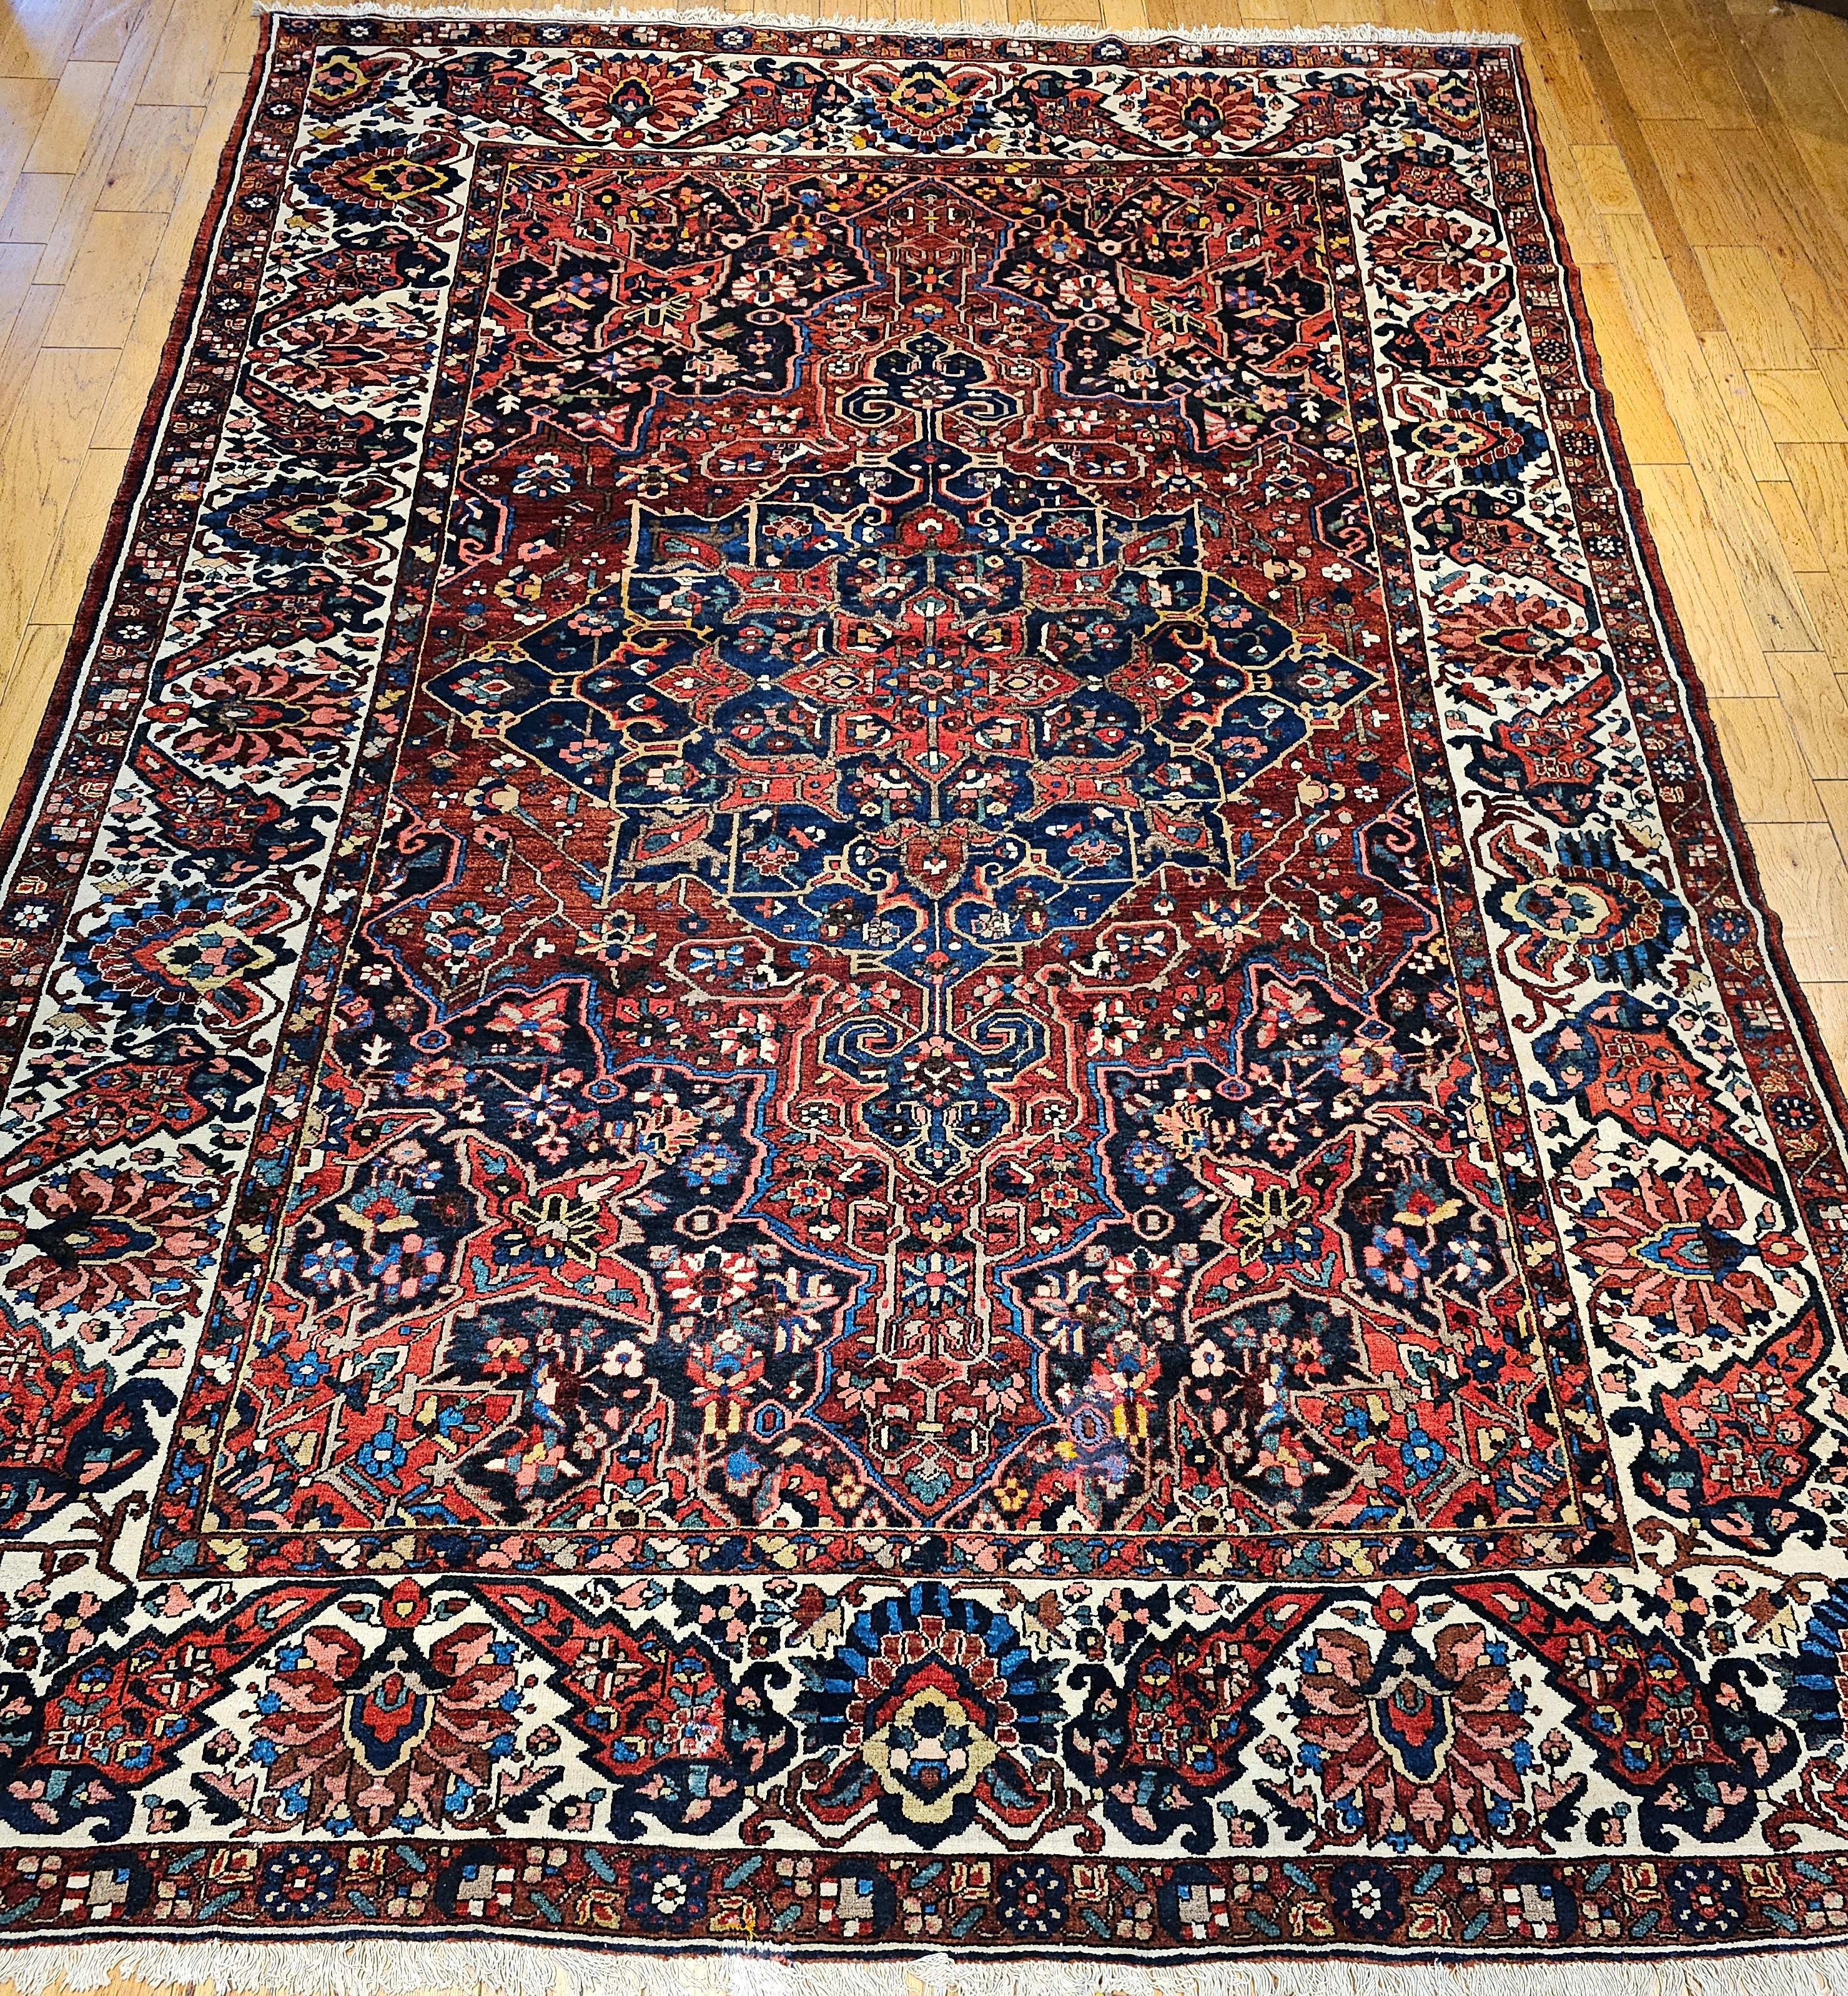  A rare oversize Persian Bakhtiari in a geometric pattern.  The rug design resembles the Persian Heriz Serapi geometric rugs from NW Persia and makes this a very desirable Bakhtiari.    The rug has a dark red/burgundy background color with center